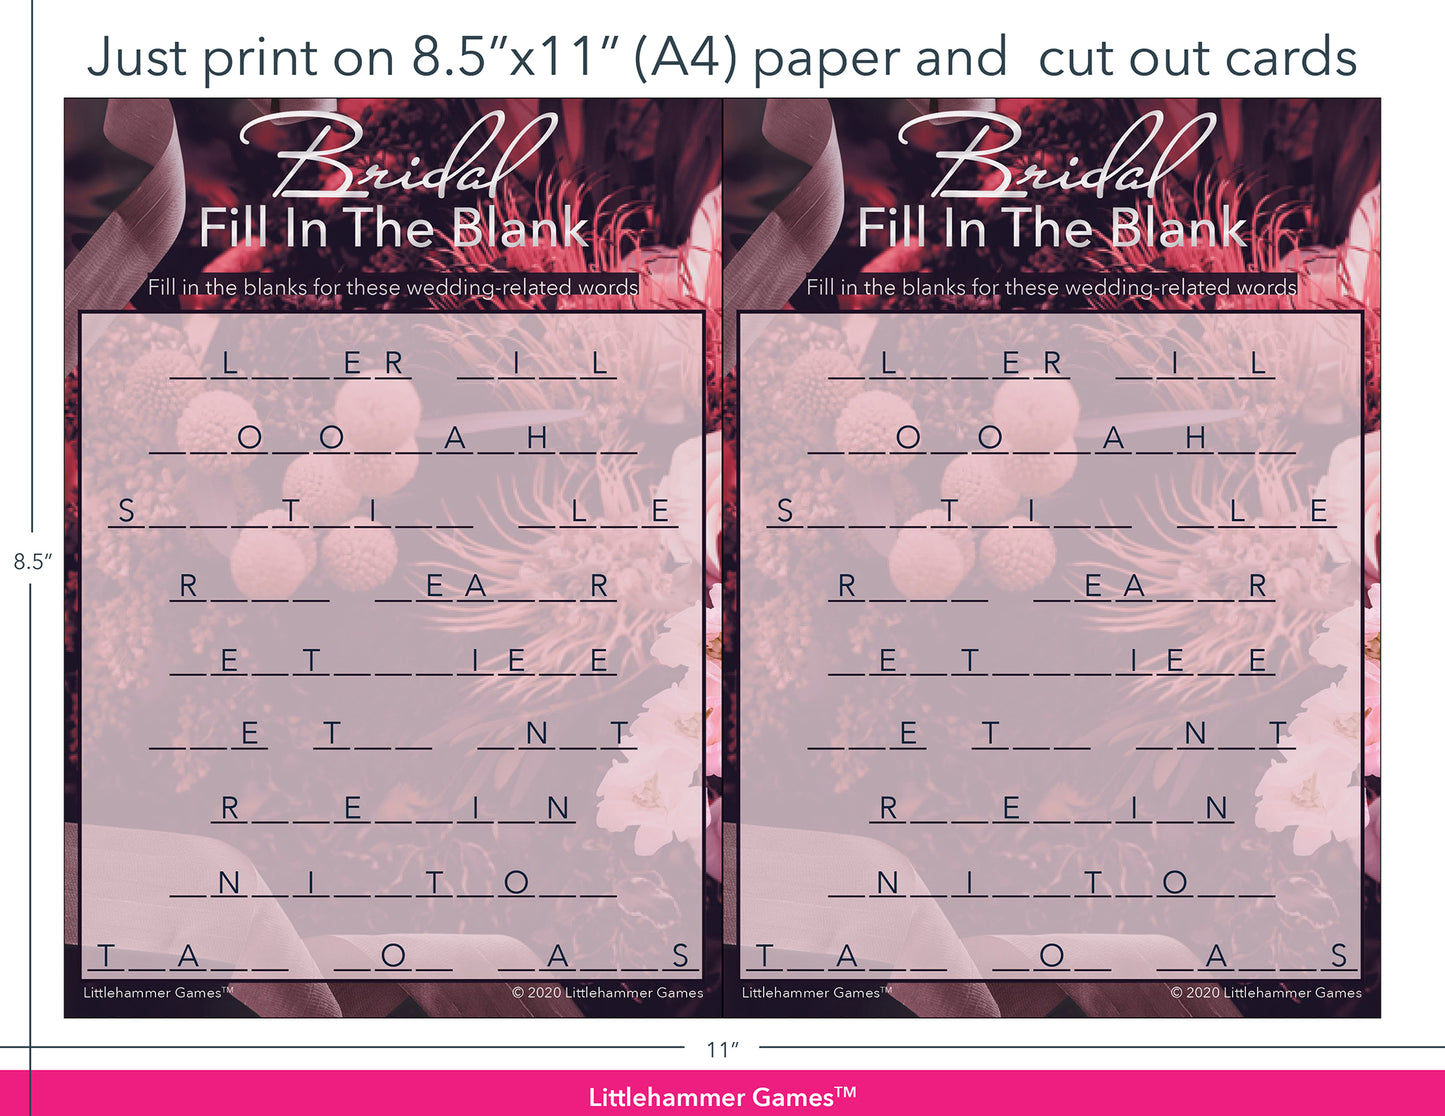 Bridal Fill in the Blank dark floral game cards with printing instructions